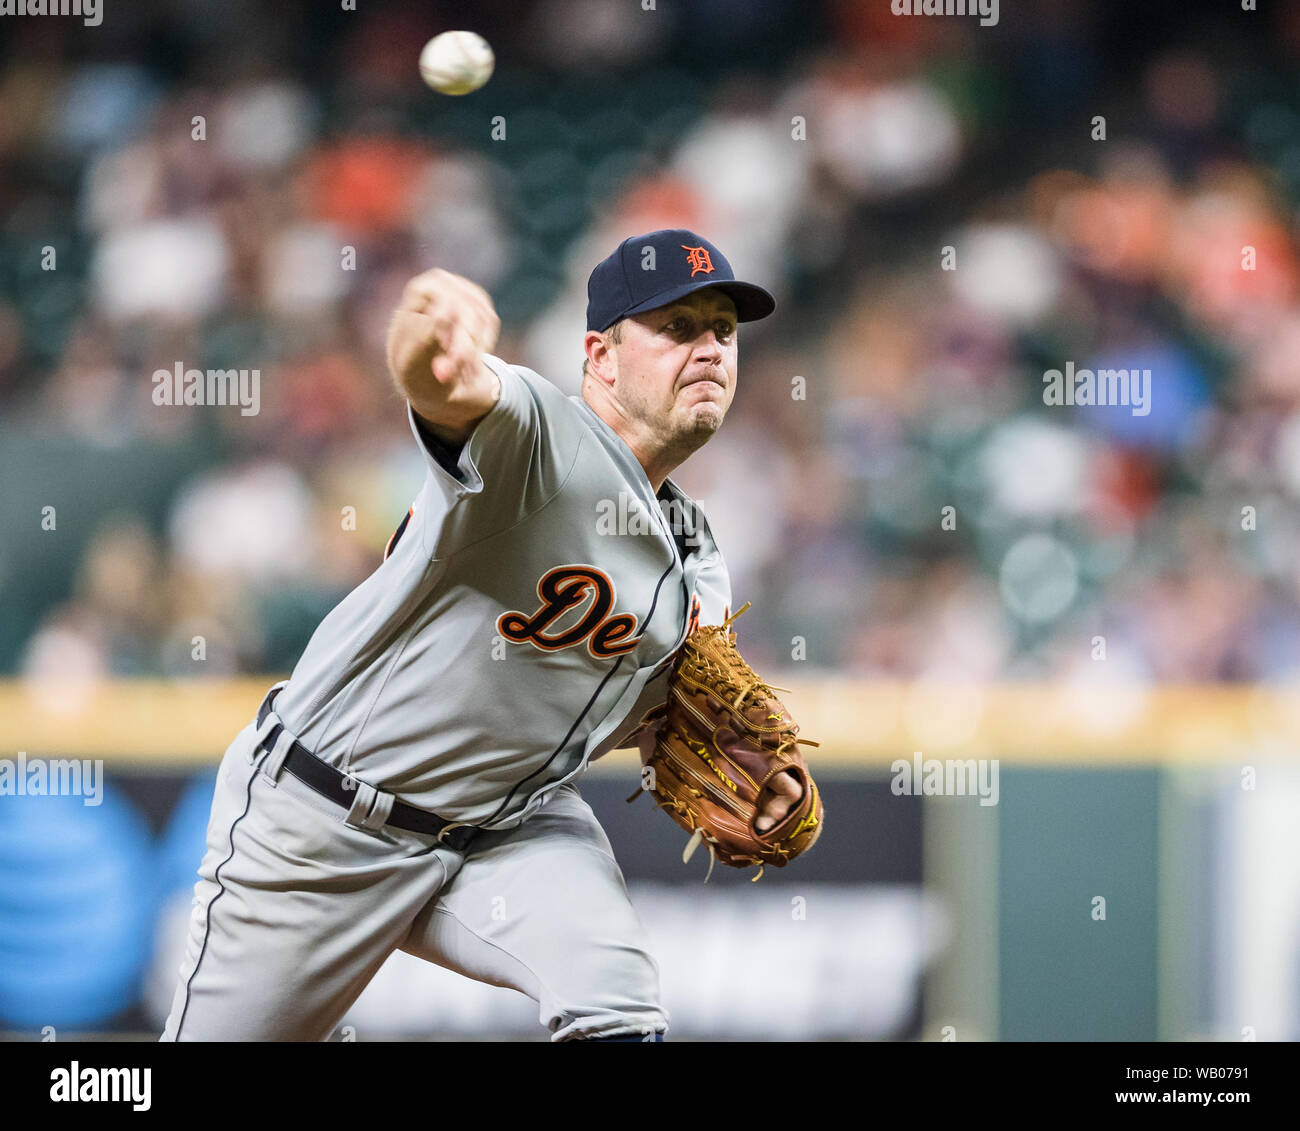 Houston, Texas, USA. 22nd Aug, 2019. August 22, 2019: Detroit Tigers starting pitcher Jordan Zimmermann (27) works to the plate during the Major League Baseball game between the Detroit Tigers and the Houston Astros at Minute Maid Park in Houston, Texas. Houston defeated Detroit 6-3. Prentice C. James/CSM Credit: Cal Sport Media/Alamy Live News Stock Photo